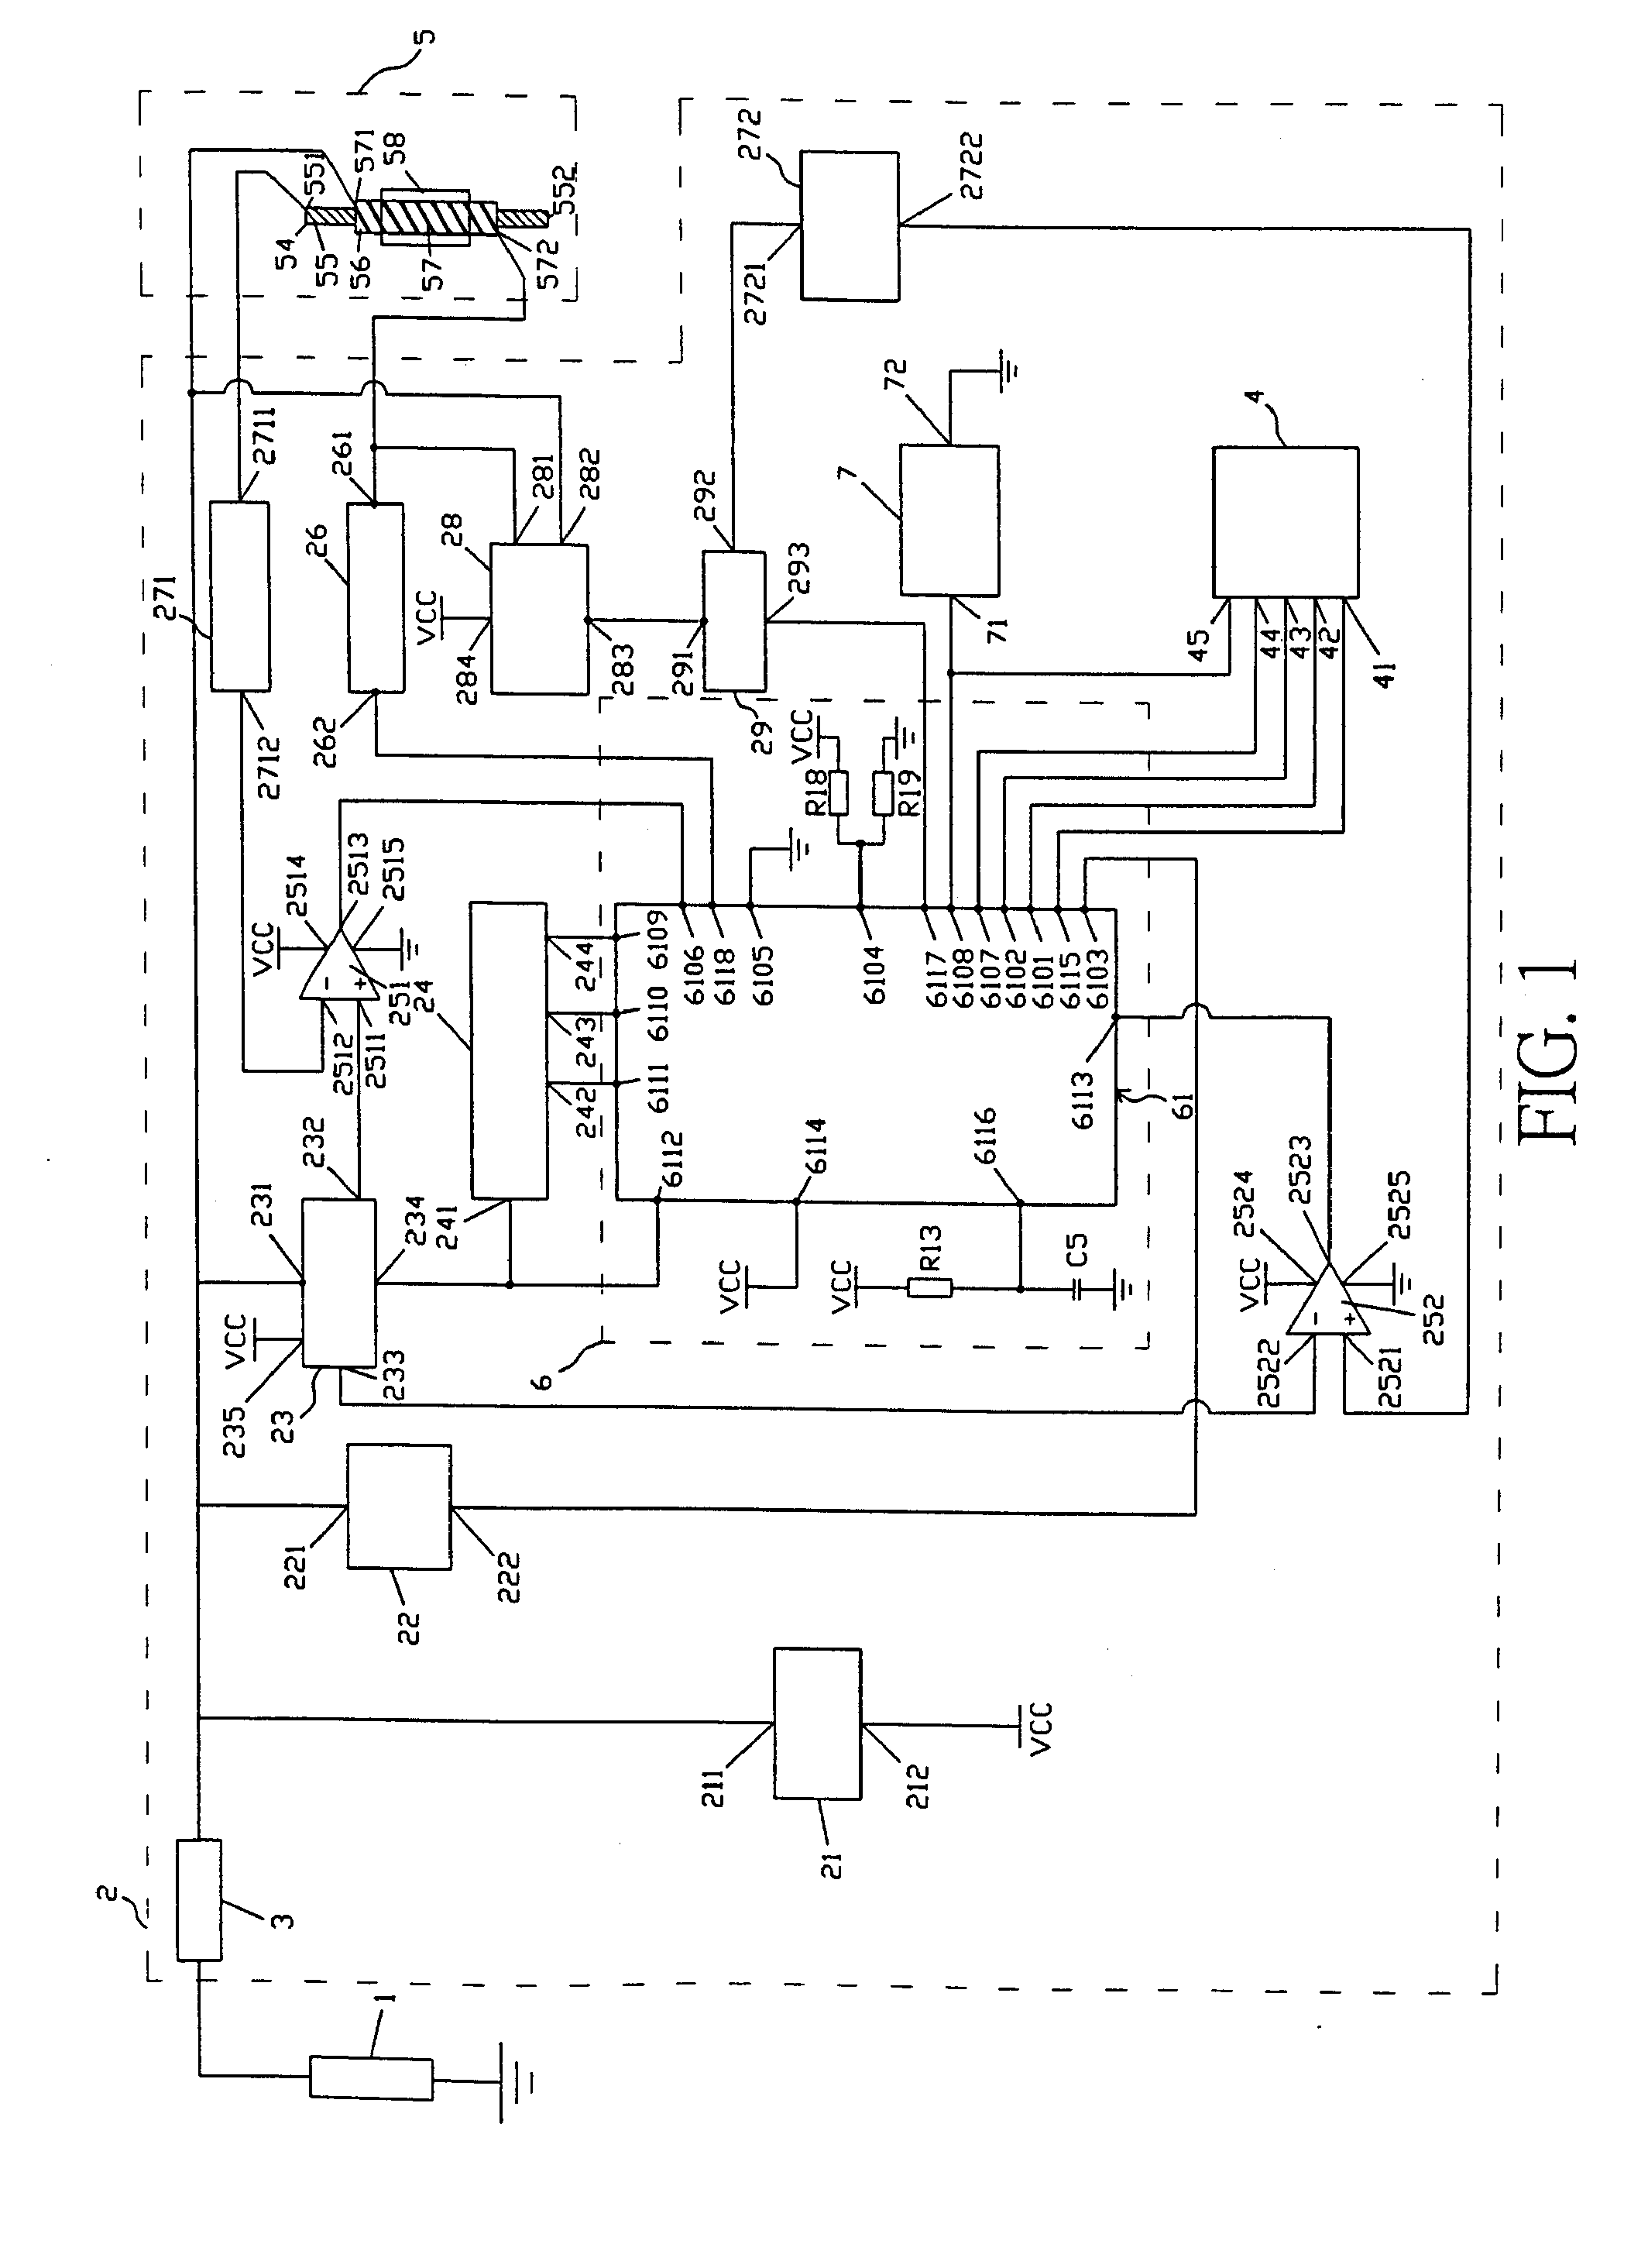 Heating device having dual-core heating cable